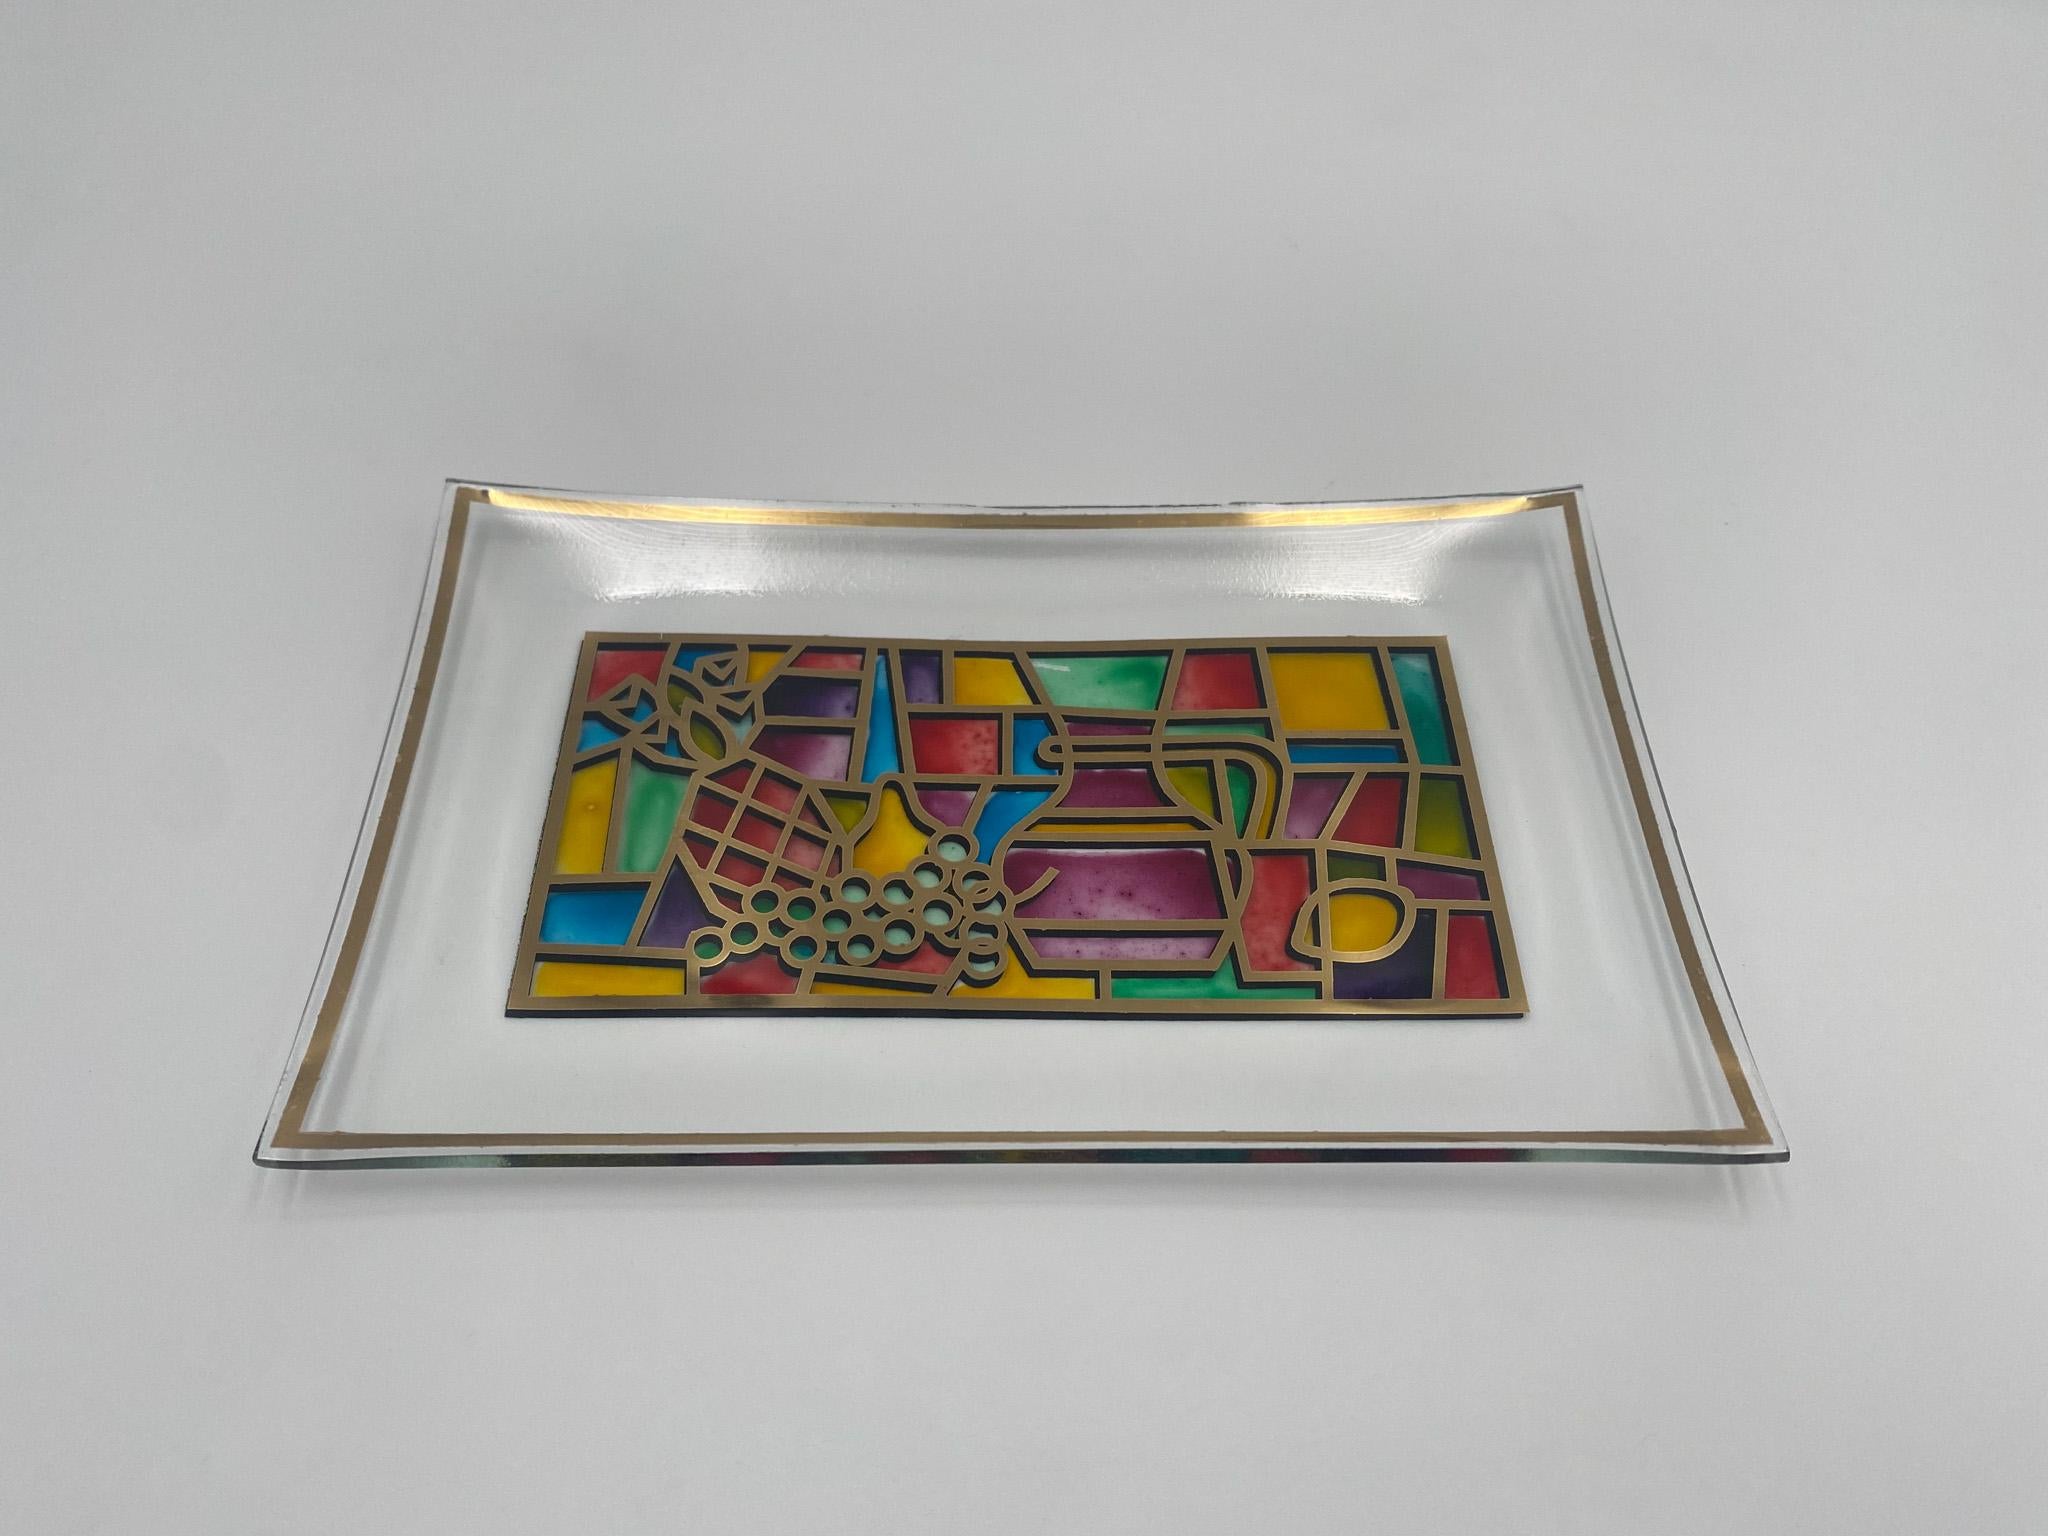 Hand Painted Stained Glass Tray, United States, 1960's. ( Two Trays Available. )